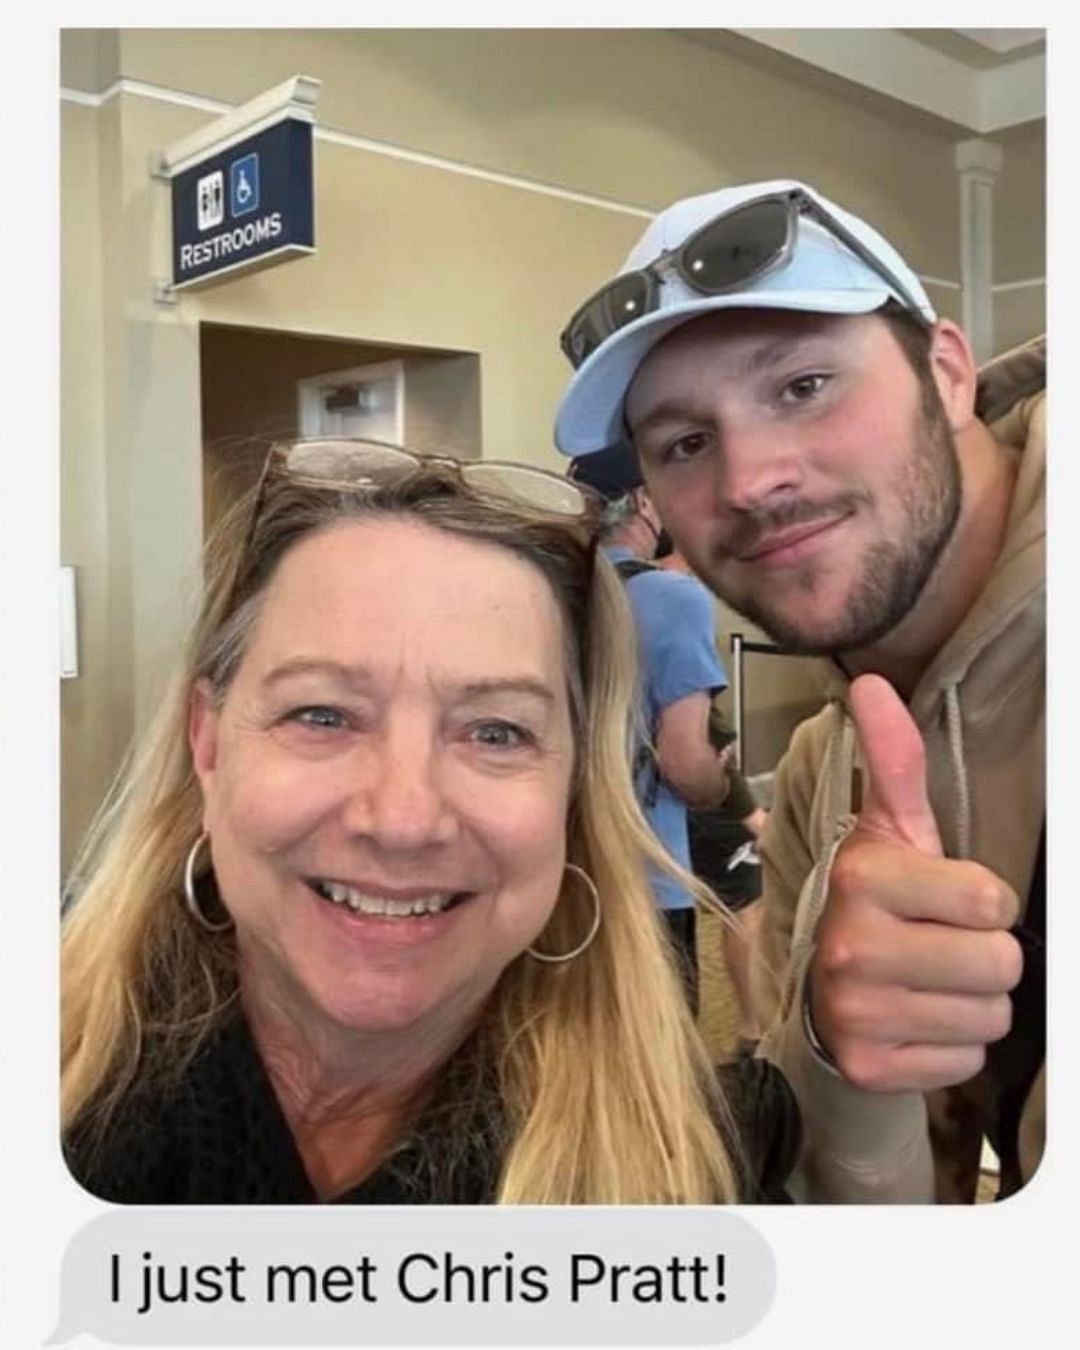 Allen takes a photo with the mom at the airport. Credit: @BillsMafiaBabes (Twitter)